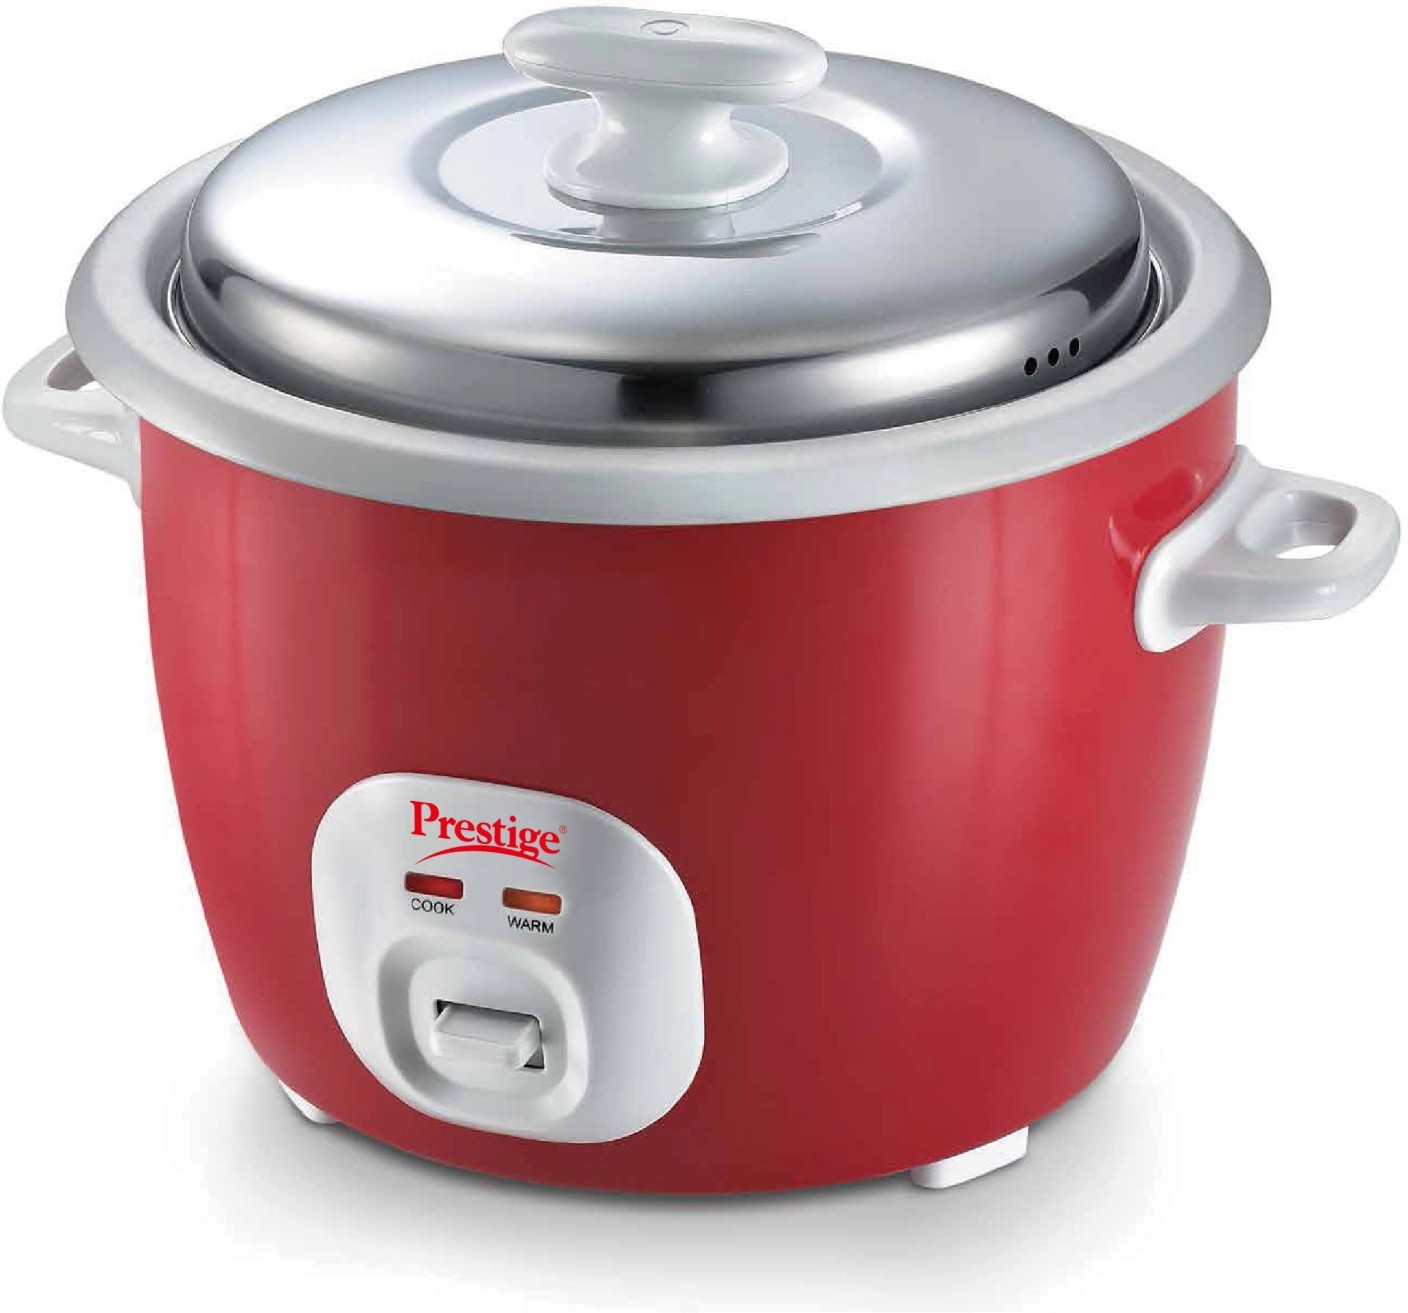 Prestige CUTE 1.8-2 Electric Rice Cooker with Steaming Feature Price in ...